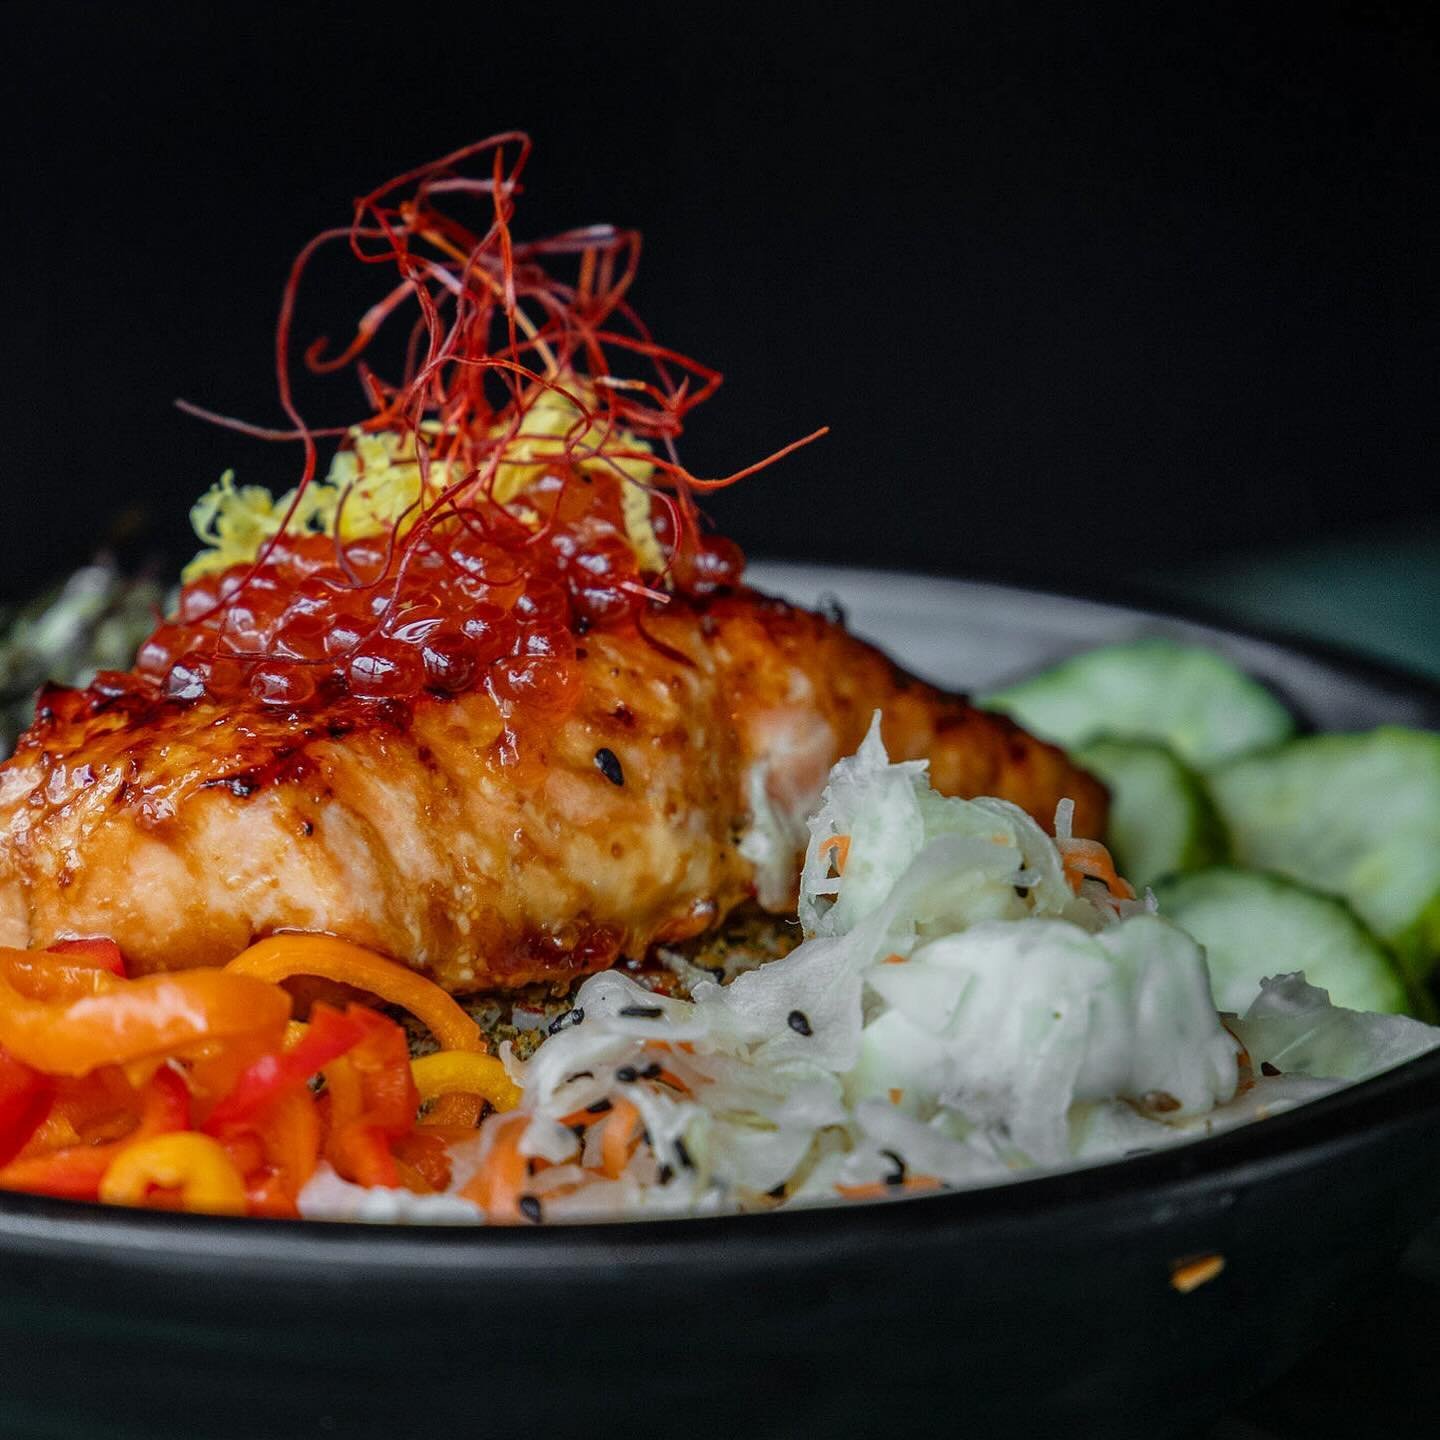 🥢Teriyaki salmon, topped with roe, accompanied by pickled veggies &amp; napa slaw on a bed of steamed sushi rice. 😍